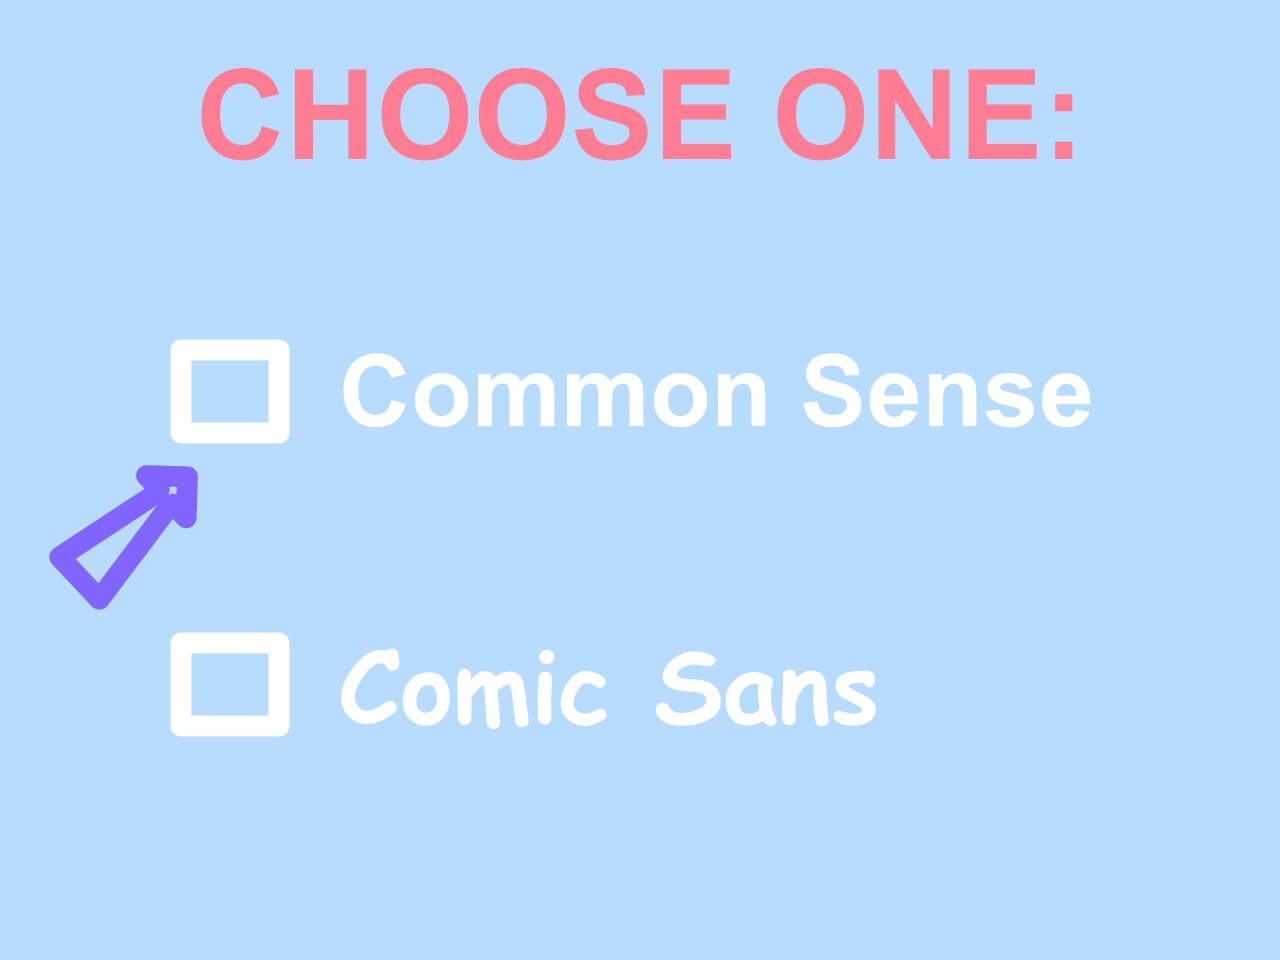 Image showing how common sense should be used to choose the right font typeface